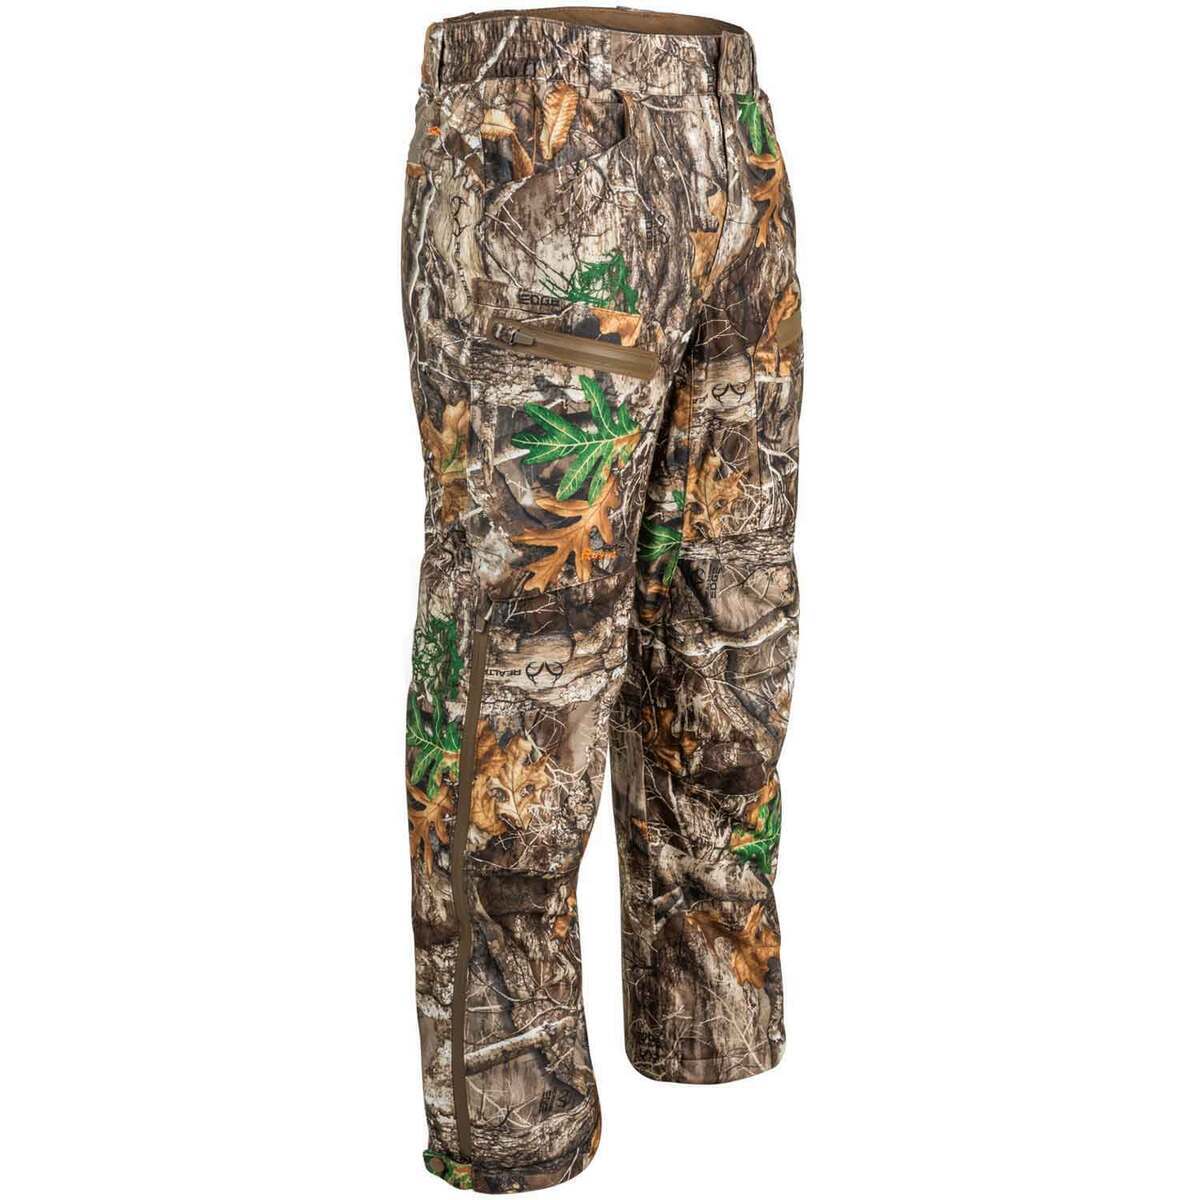 Rustic Ridge Men's Realtree Edge Insulated Hunting Pants - Realtree Edge XL by Sportsman's Warehouse